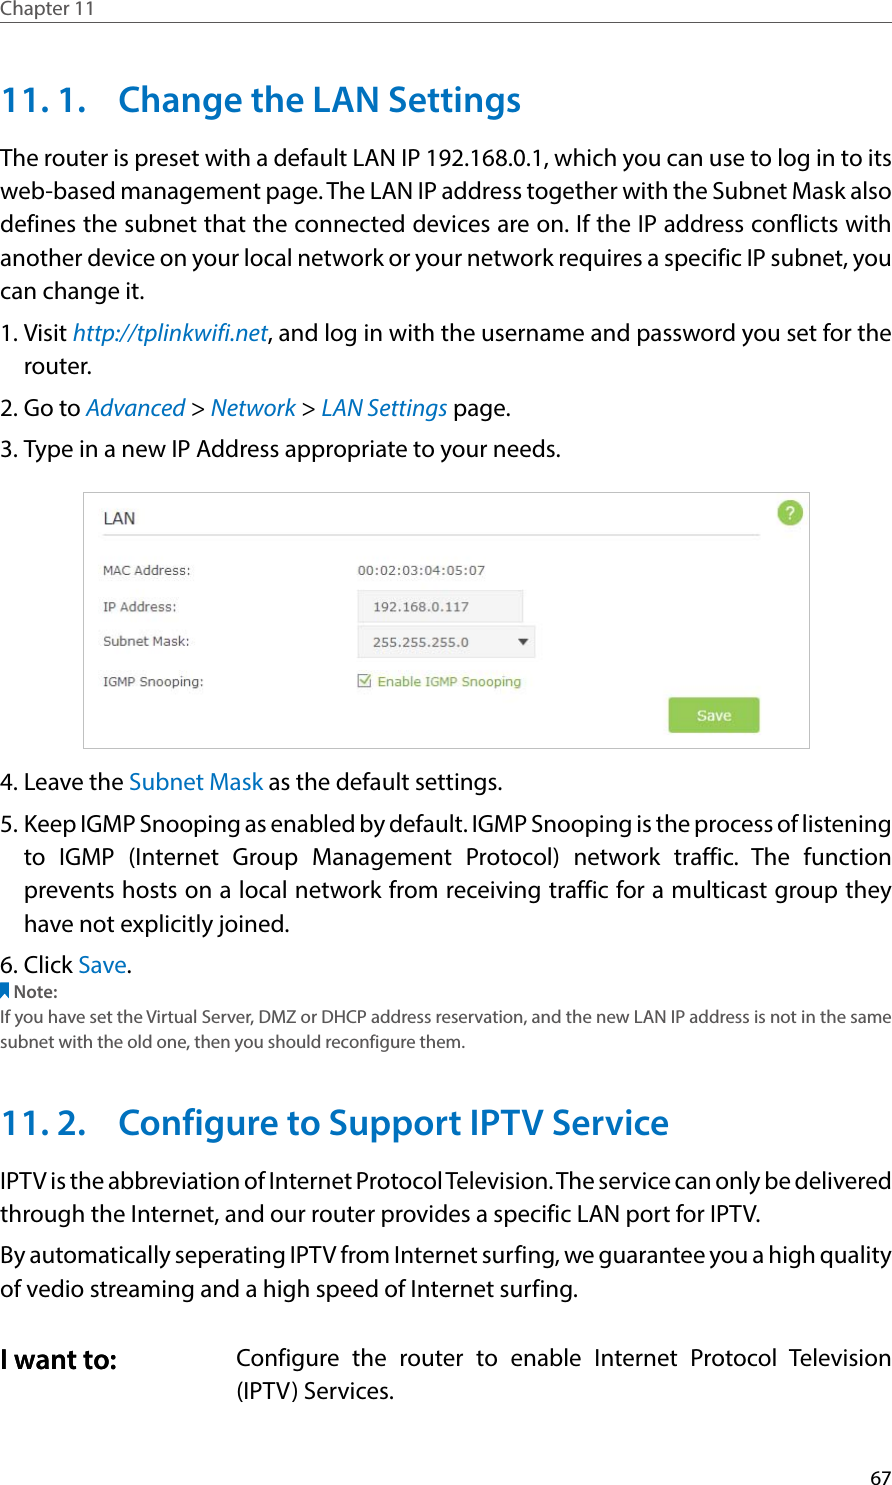 67Chapter 11  11. 1.  Change the LAN SettingsThe router is preset with a default LAN IP 192.168.0.1, which you can use to log in to its web-based management page. The LAN IP address together with the Subnet Mask also defines the subnet that the connected devices are on. If the IP address conflicts with another device on your local network or your network requires a specific IP subnet, you can change it.1. Visit http://tplinkwifi.net, and log in with the username and password you set for the router. 2. Go to Advanced &gt; Network &gt; LAN Settings page. 3. Type in a new IP Address appropriate to your needs. 4. Leave the Subnet Mask as the default settings. 5. Keep IGMP Snooping as enabled by default. IGMP Snooping is the process of listening to IGMP (Internet Group Management Protocol) network traffic. The function prevents hosts on a local network from receiving traffic for a multicast group they have not explicitly joined. 6. Click Save. Note:If you have set the Virtual Server, DMZ or DHCP address reservation, and the new LAN IP address is not in the same subnet with the old one, then you should reconfigure them.11. 2.  Configure to Support IPTV ServiceIPTV is the abbreviation of Internet Protocol Television. The service can only be delivered through the Internet, and our router provides a specific LAN port for IPTV. By automatically seperating IPTV from Internet surfing, we guarantee you a high quality of vedio streaming and a high speed of Internet surfing. Configure the router to enable Internet Protocol Television (IPTV) Services.I want to:I want to: